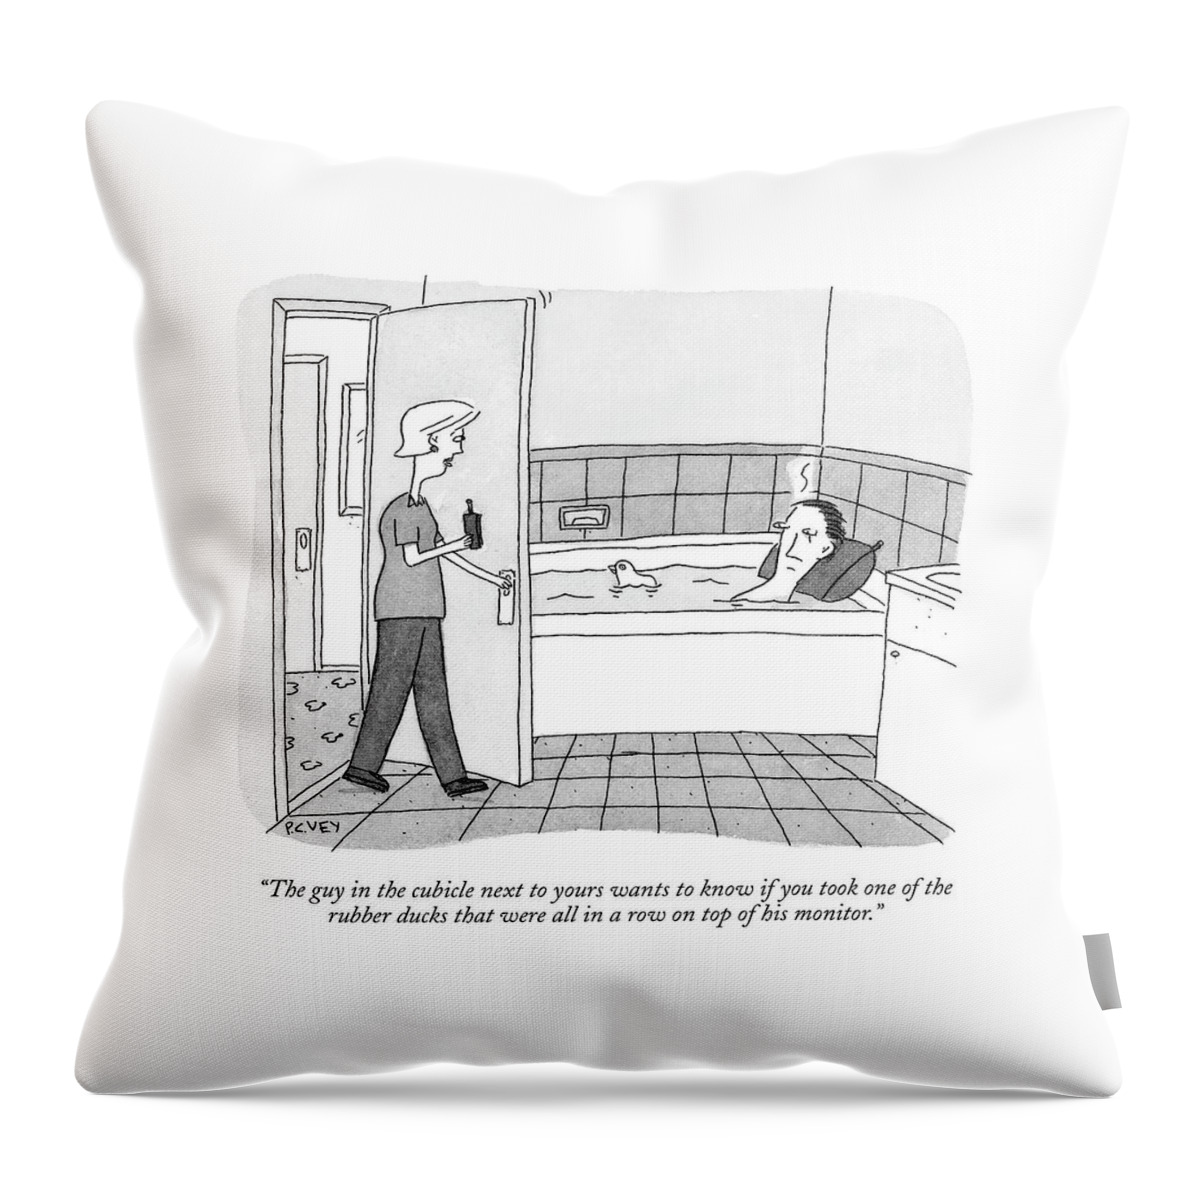 The Guy In The Cubicle Next To Yours Wants Throw Pillow